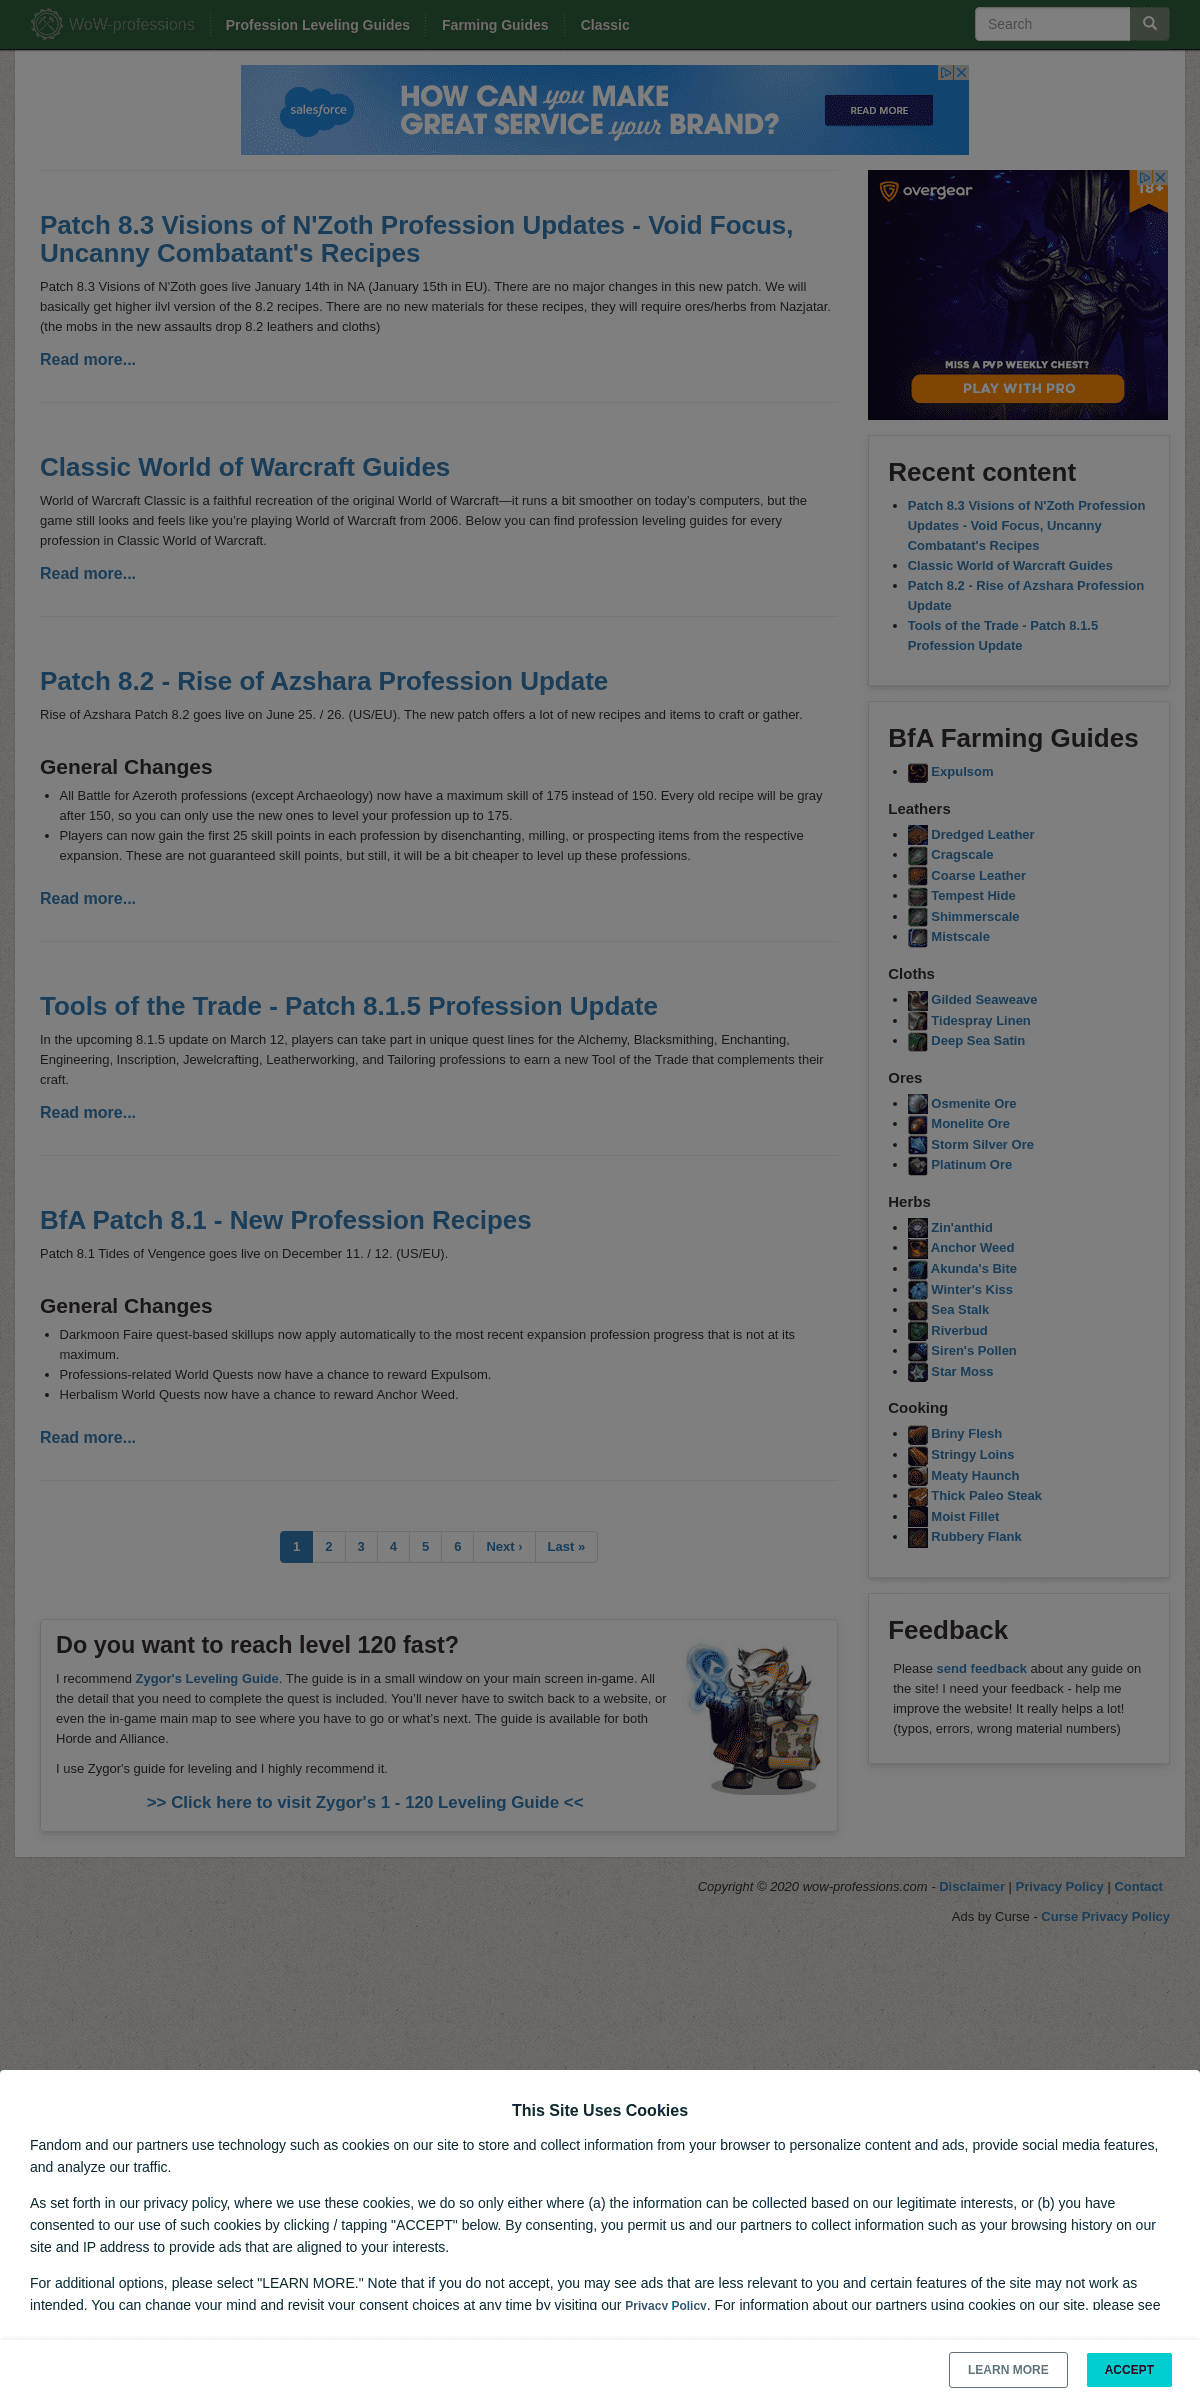 A complete backup of wow-professions.com